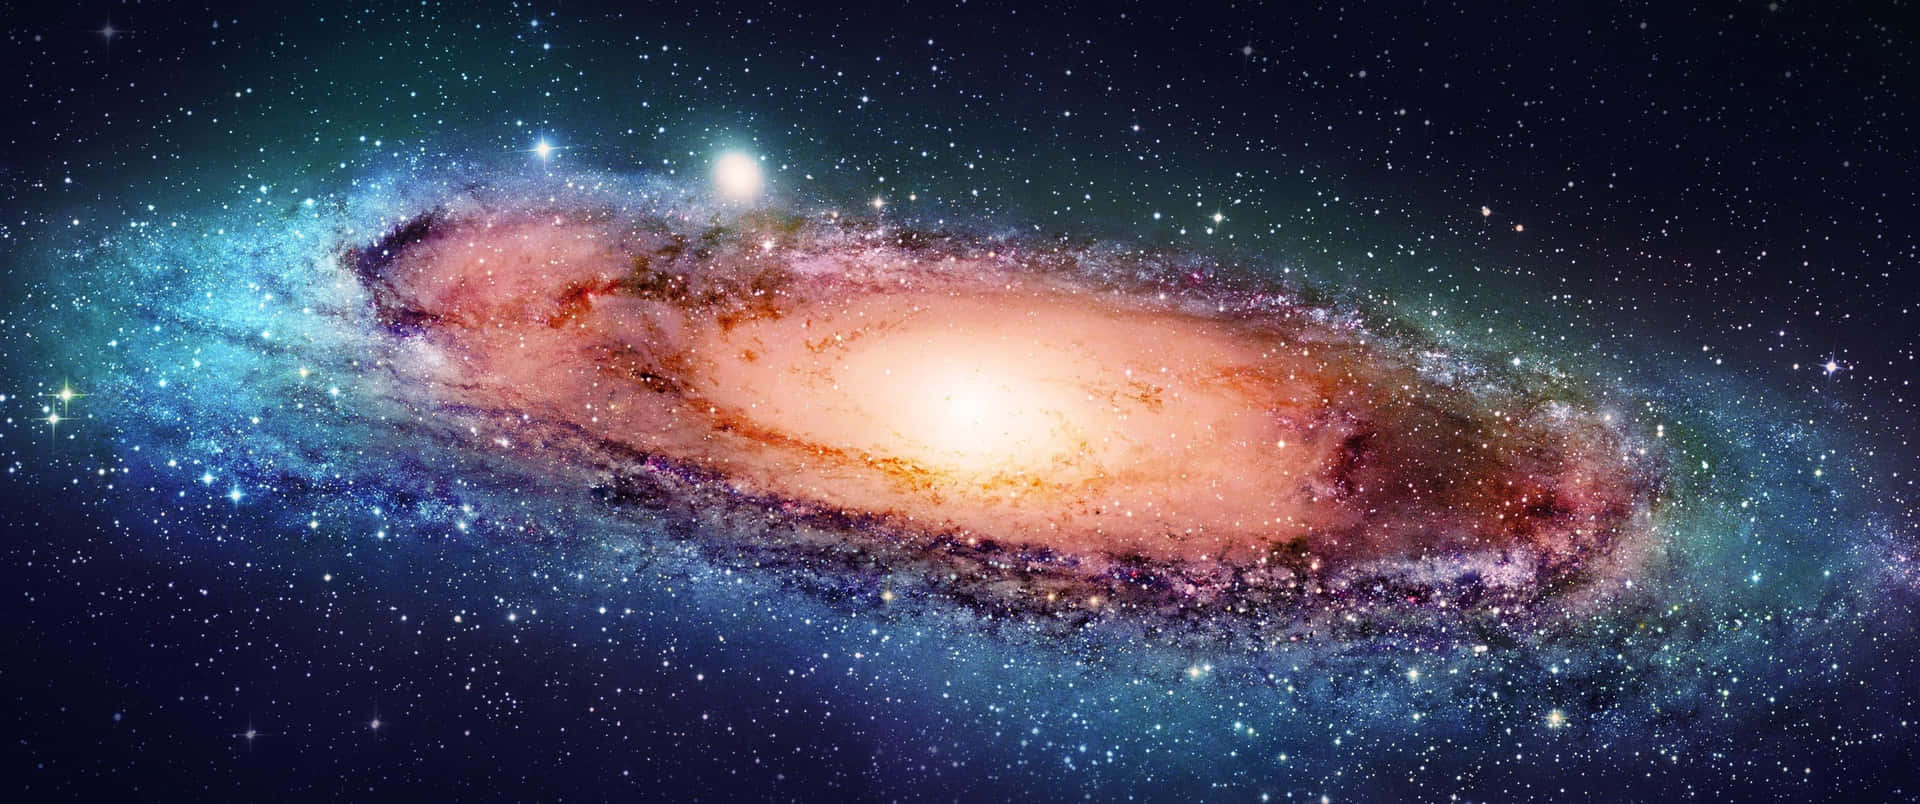 Stunning 3440x1440 Space Of Andromeda Galaxy Wallpaper